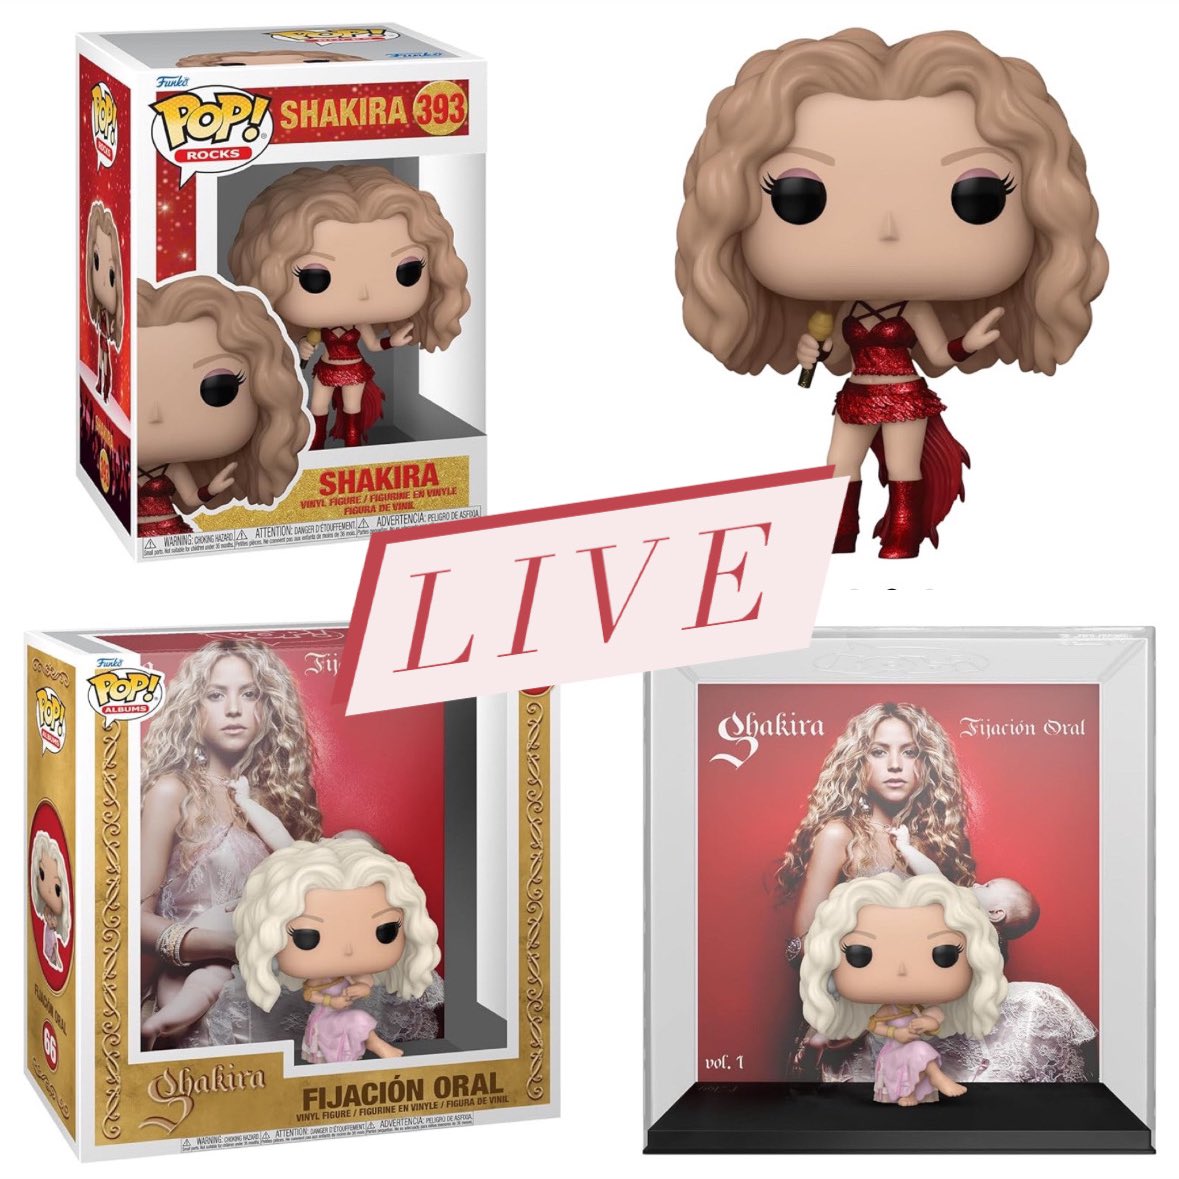 Now live! The brand new Shakira Funko POPs! With her Super Bowl outfit and Oral Fixation Album cover! EE ~ fnkpp.com/EE Amzn ~ fnkpp.com/AmShak MHS ~ fnkpp.com/MH #Ad #Shakira #FPN #FunkoPOPNews #Funko #POP #POPVinyl #FunkoPOP #FunkoSoda